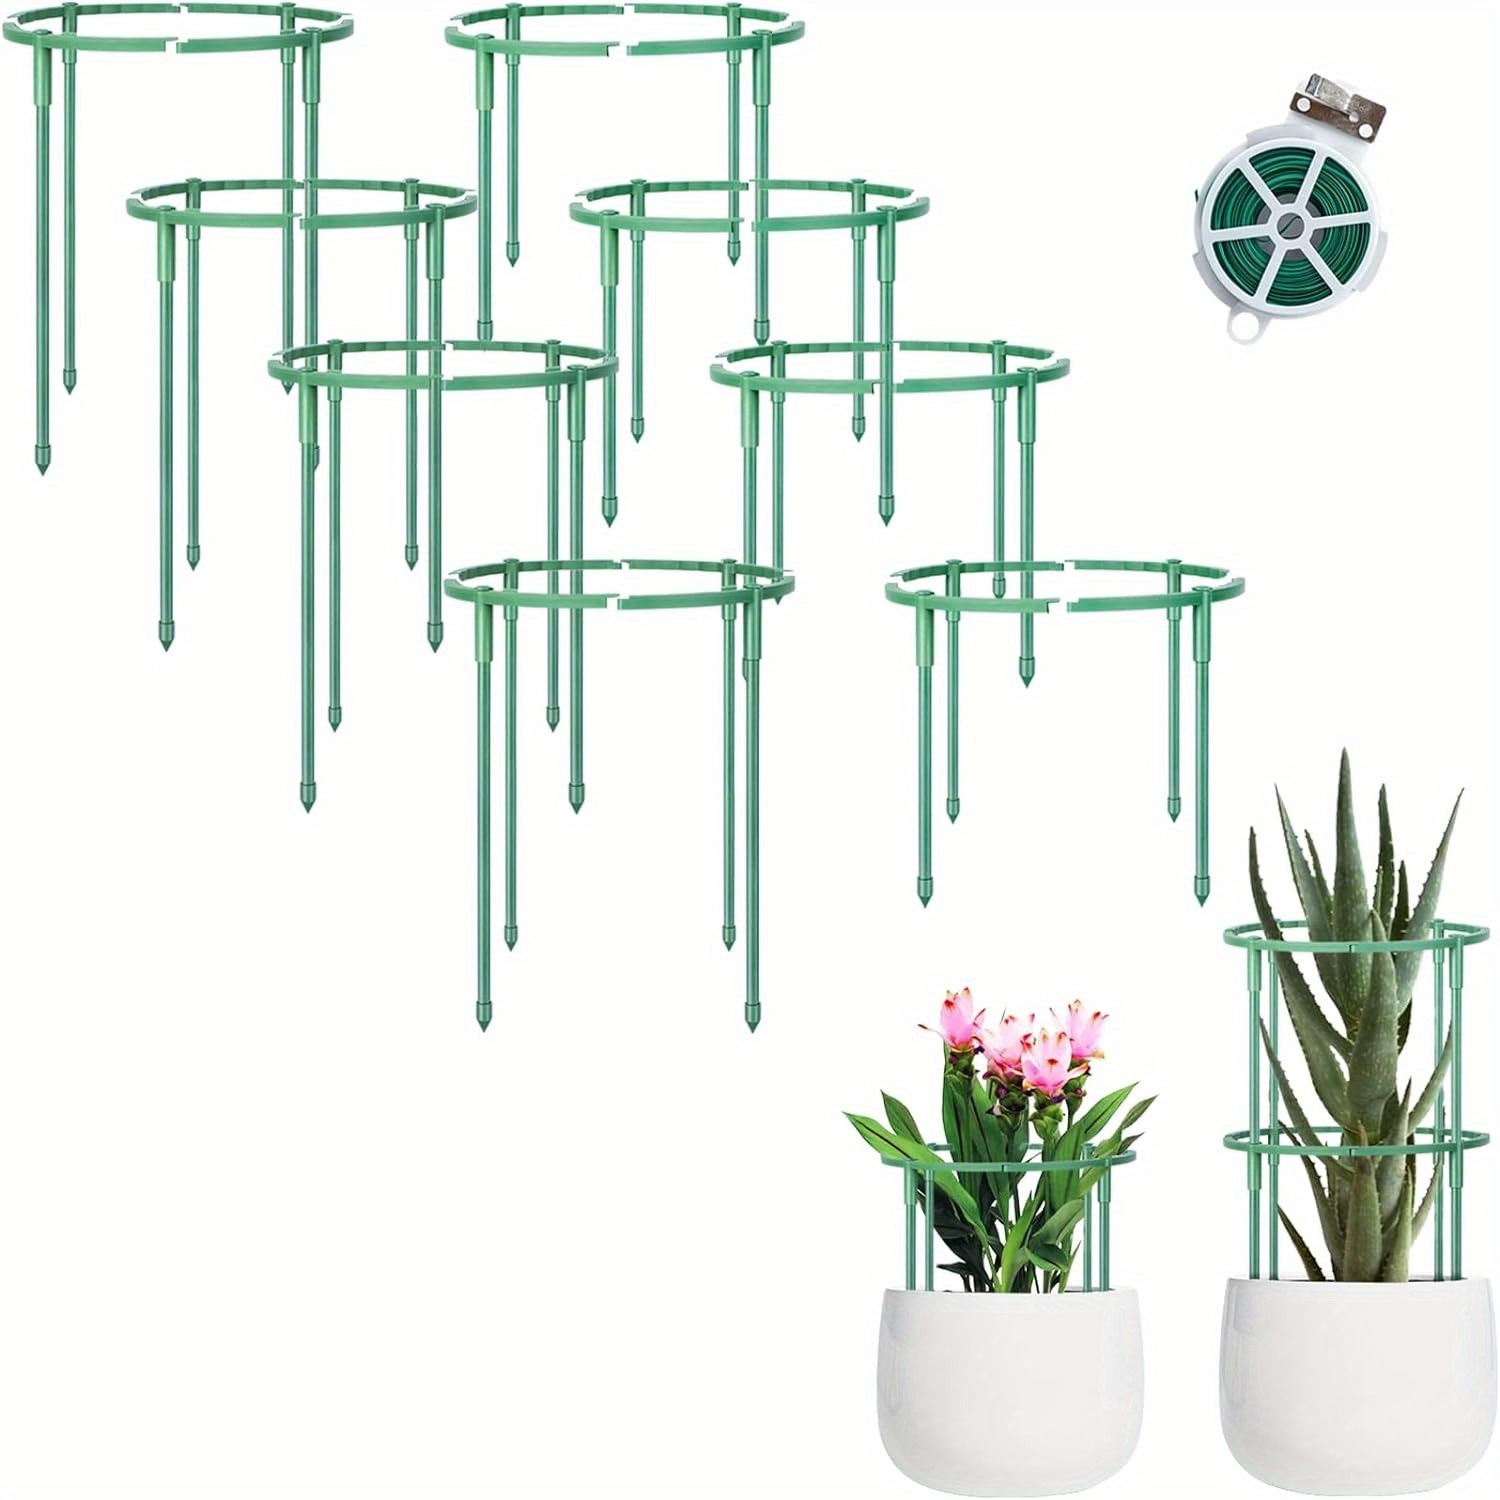 

8 Set Of Plant Support Stakes, 32pcs Stackable Flower Support Stakes, Half Round Plant Supports With 65ft Twist Tie, Plant Stakes For Garden Indoor Outdoor Plants Flowers